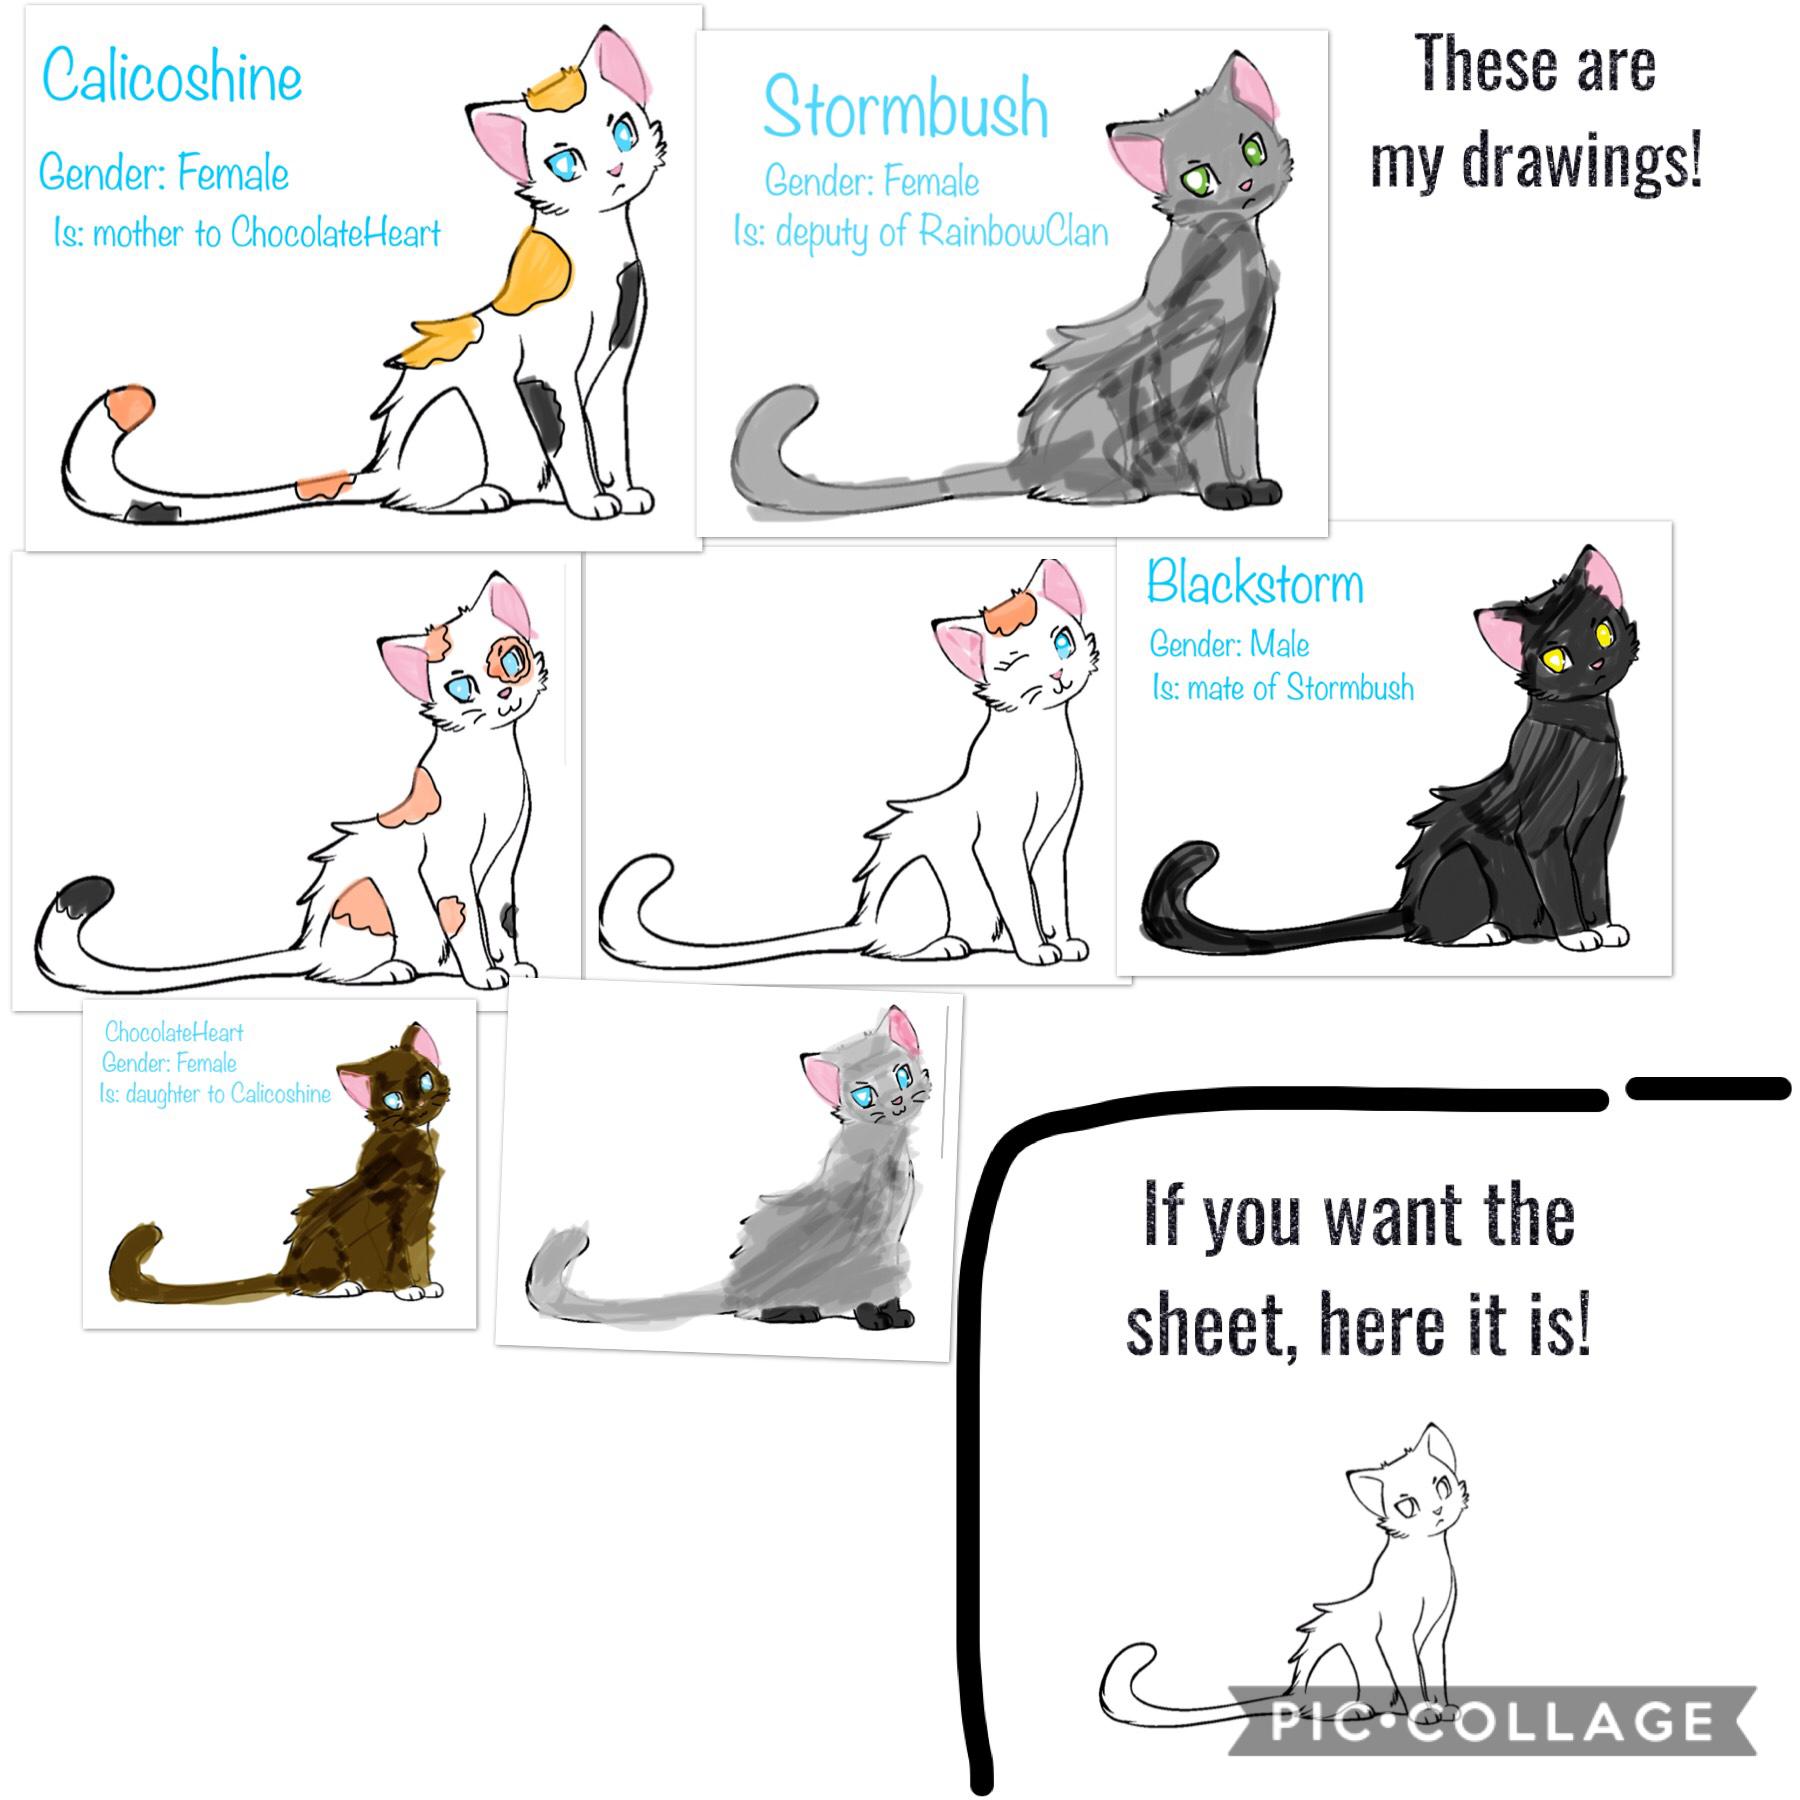 Here’s something to tell you about cats!